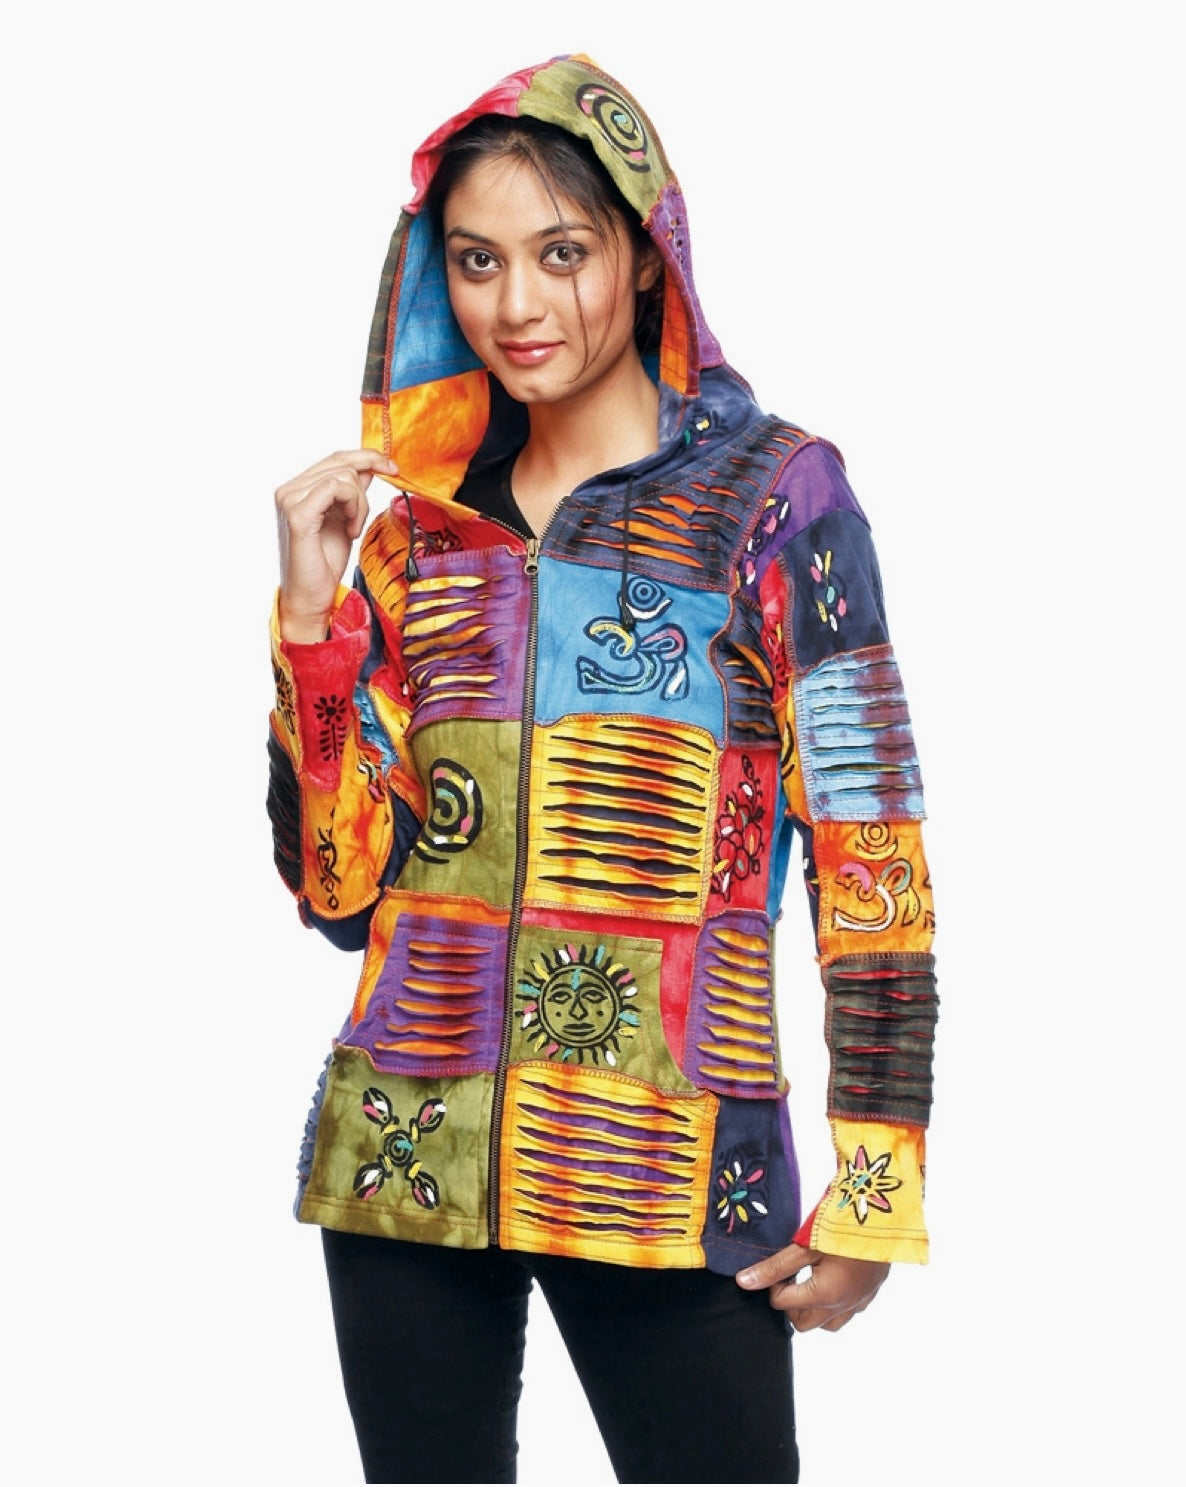 razor cut hoodie jacket in multi color with sun and om designs